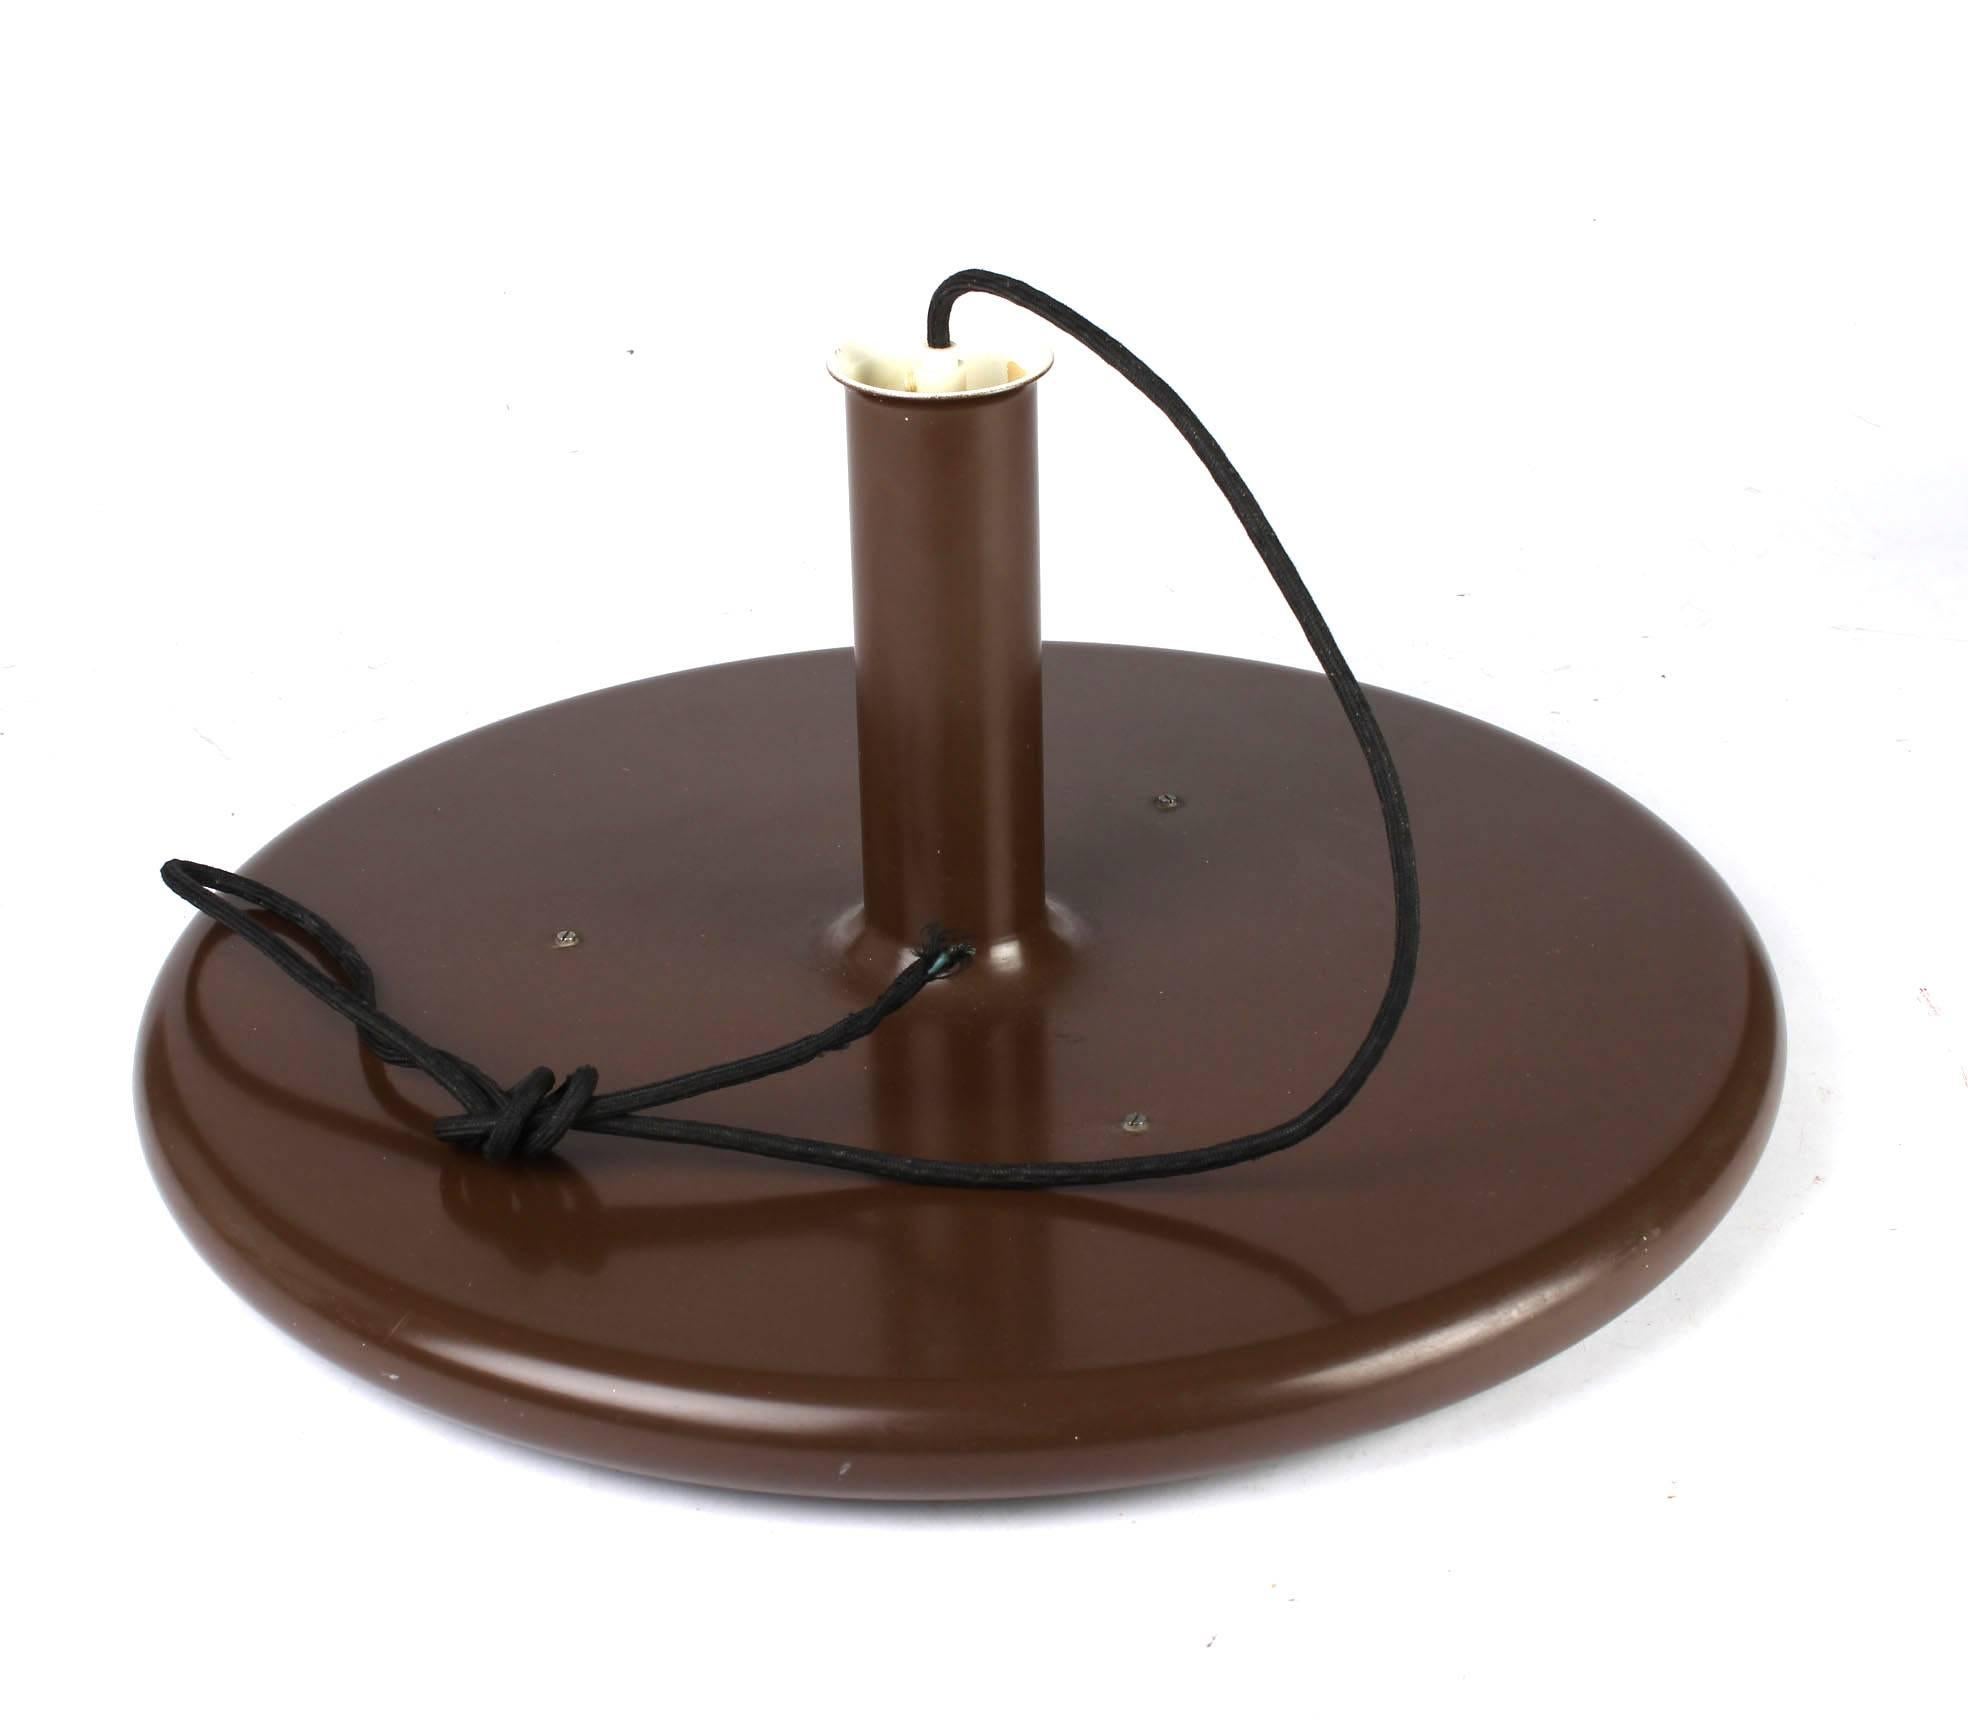 This is a large UFO lamp by Hans Due for Fog & Mørup. It features a simple round plate-shaped pendant in a dark brown color. The pendant has a size of 50cm diameter and 24 cm in height. The total height is adjustable.